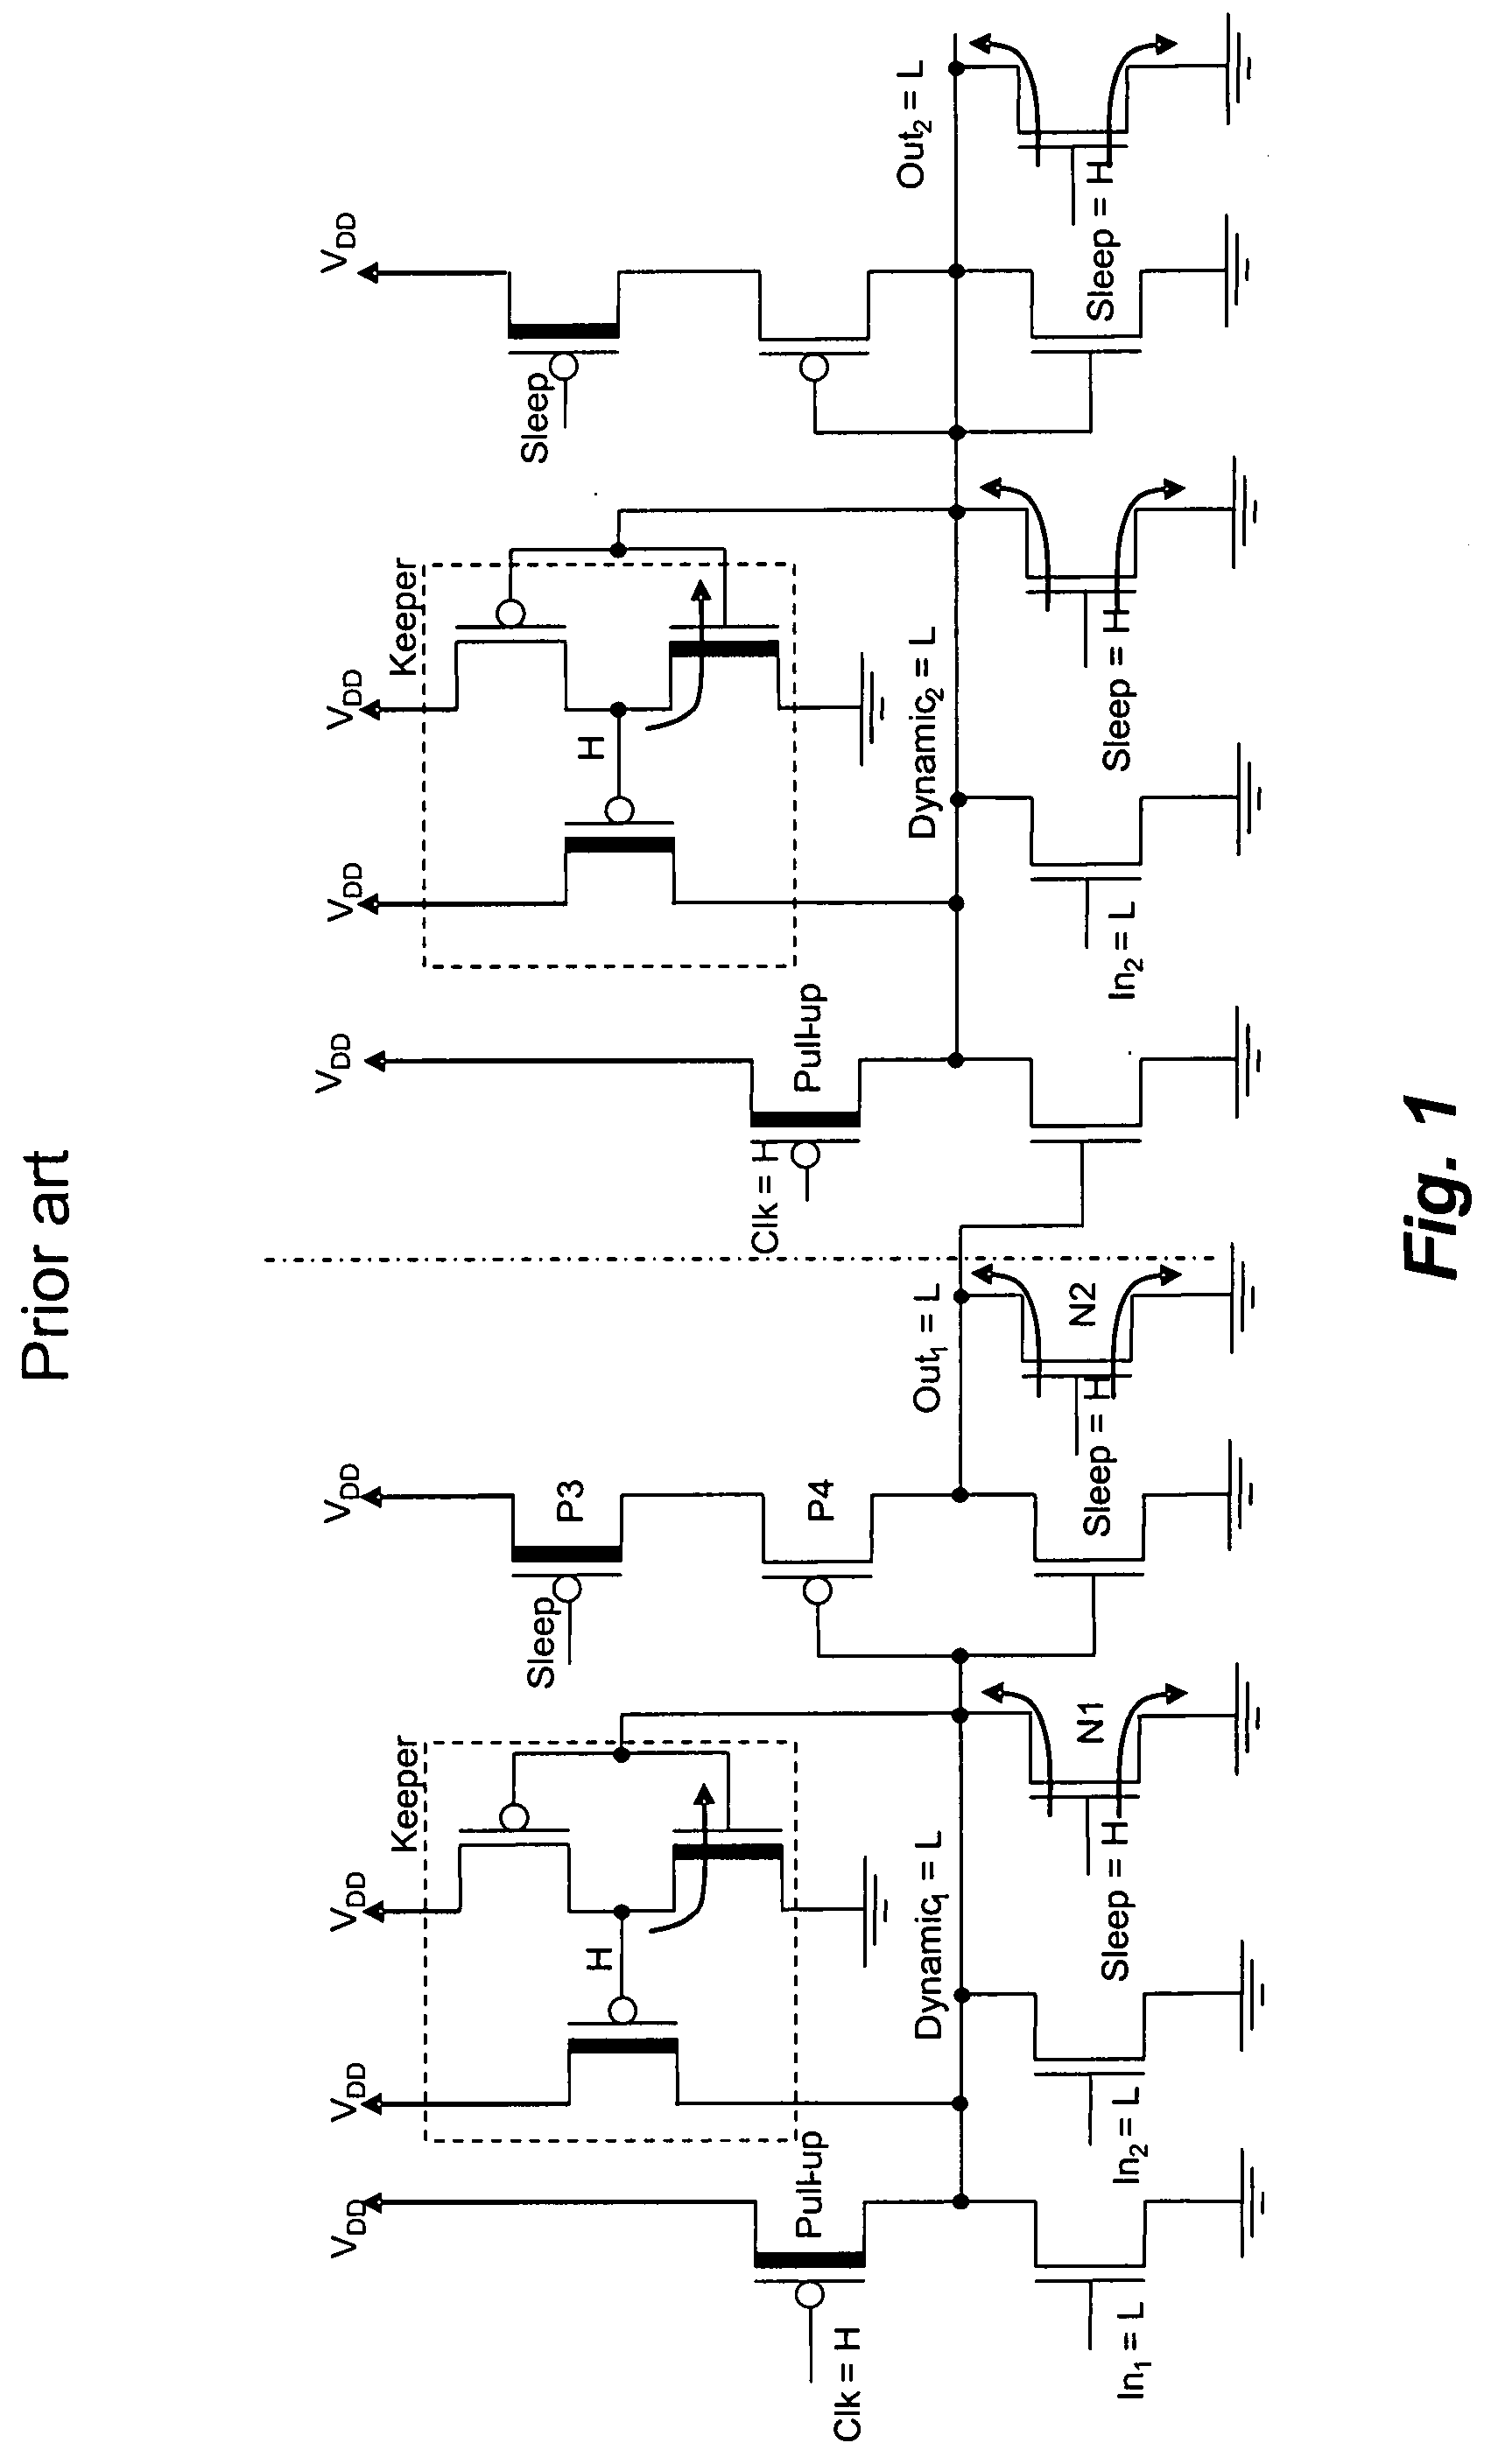 Domino logic circuit techniques for suppressing subthreshold and gate oxide leakage